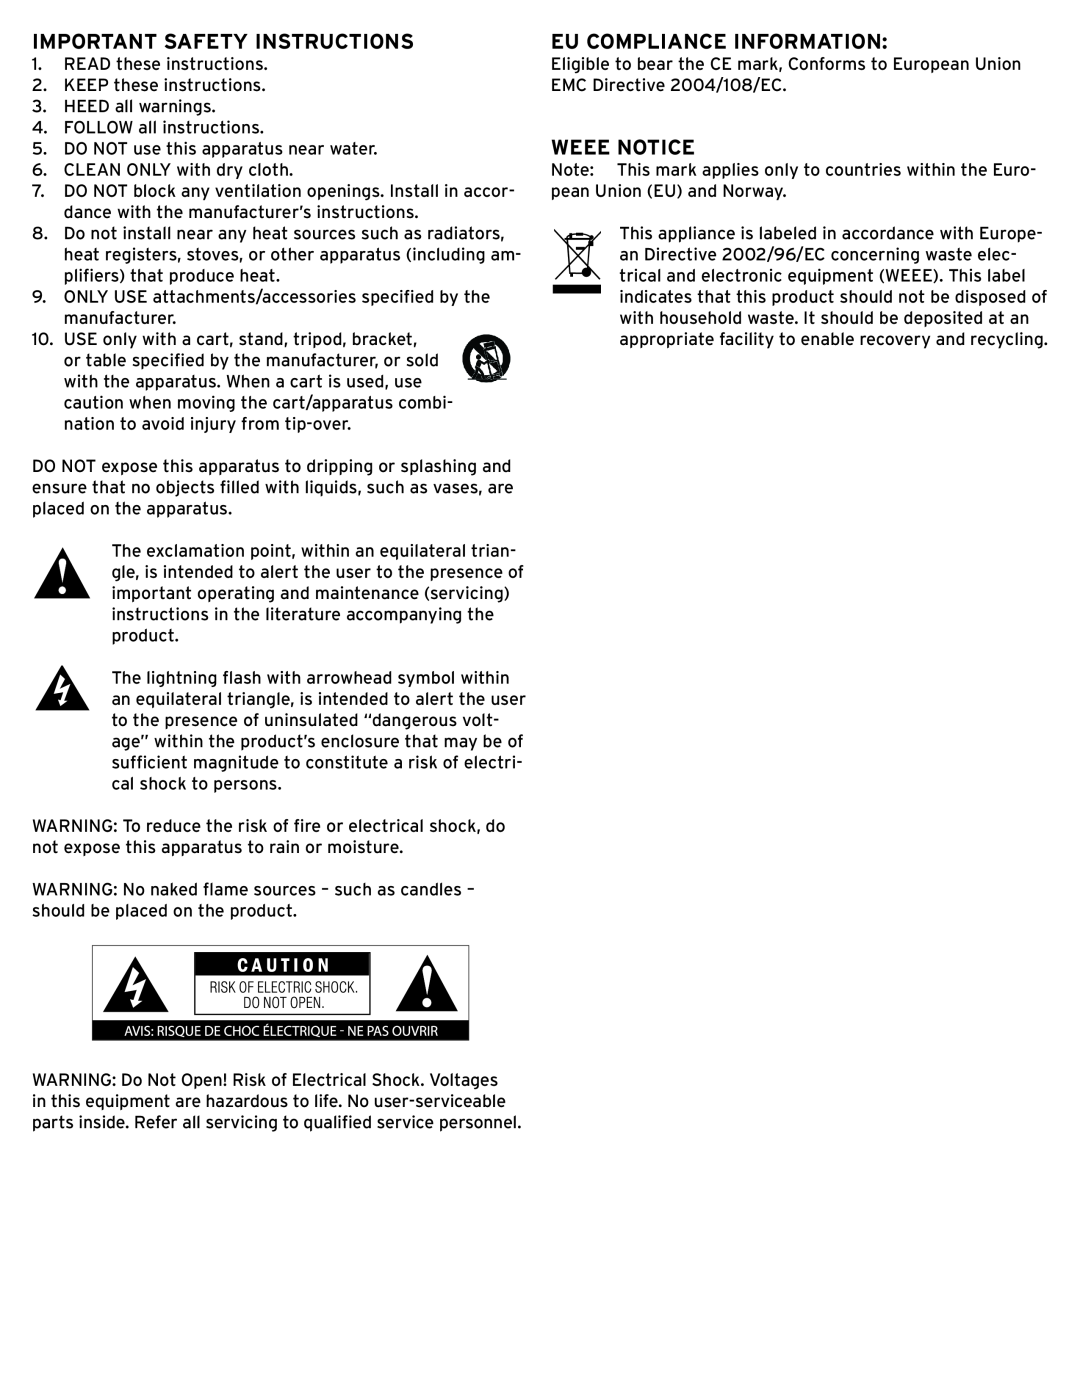 Klipsch KPT-801 owner manual Important Safety Instructions, Eu Compliance Information, Weee Notice 